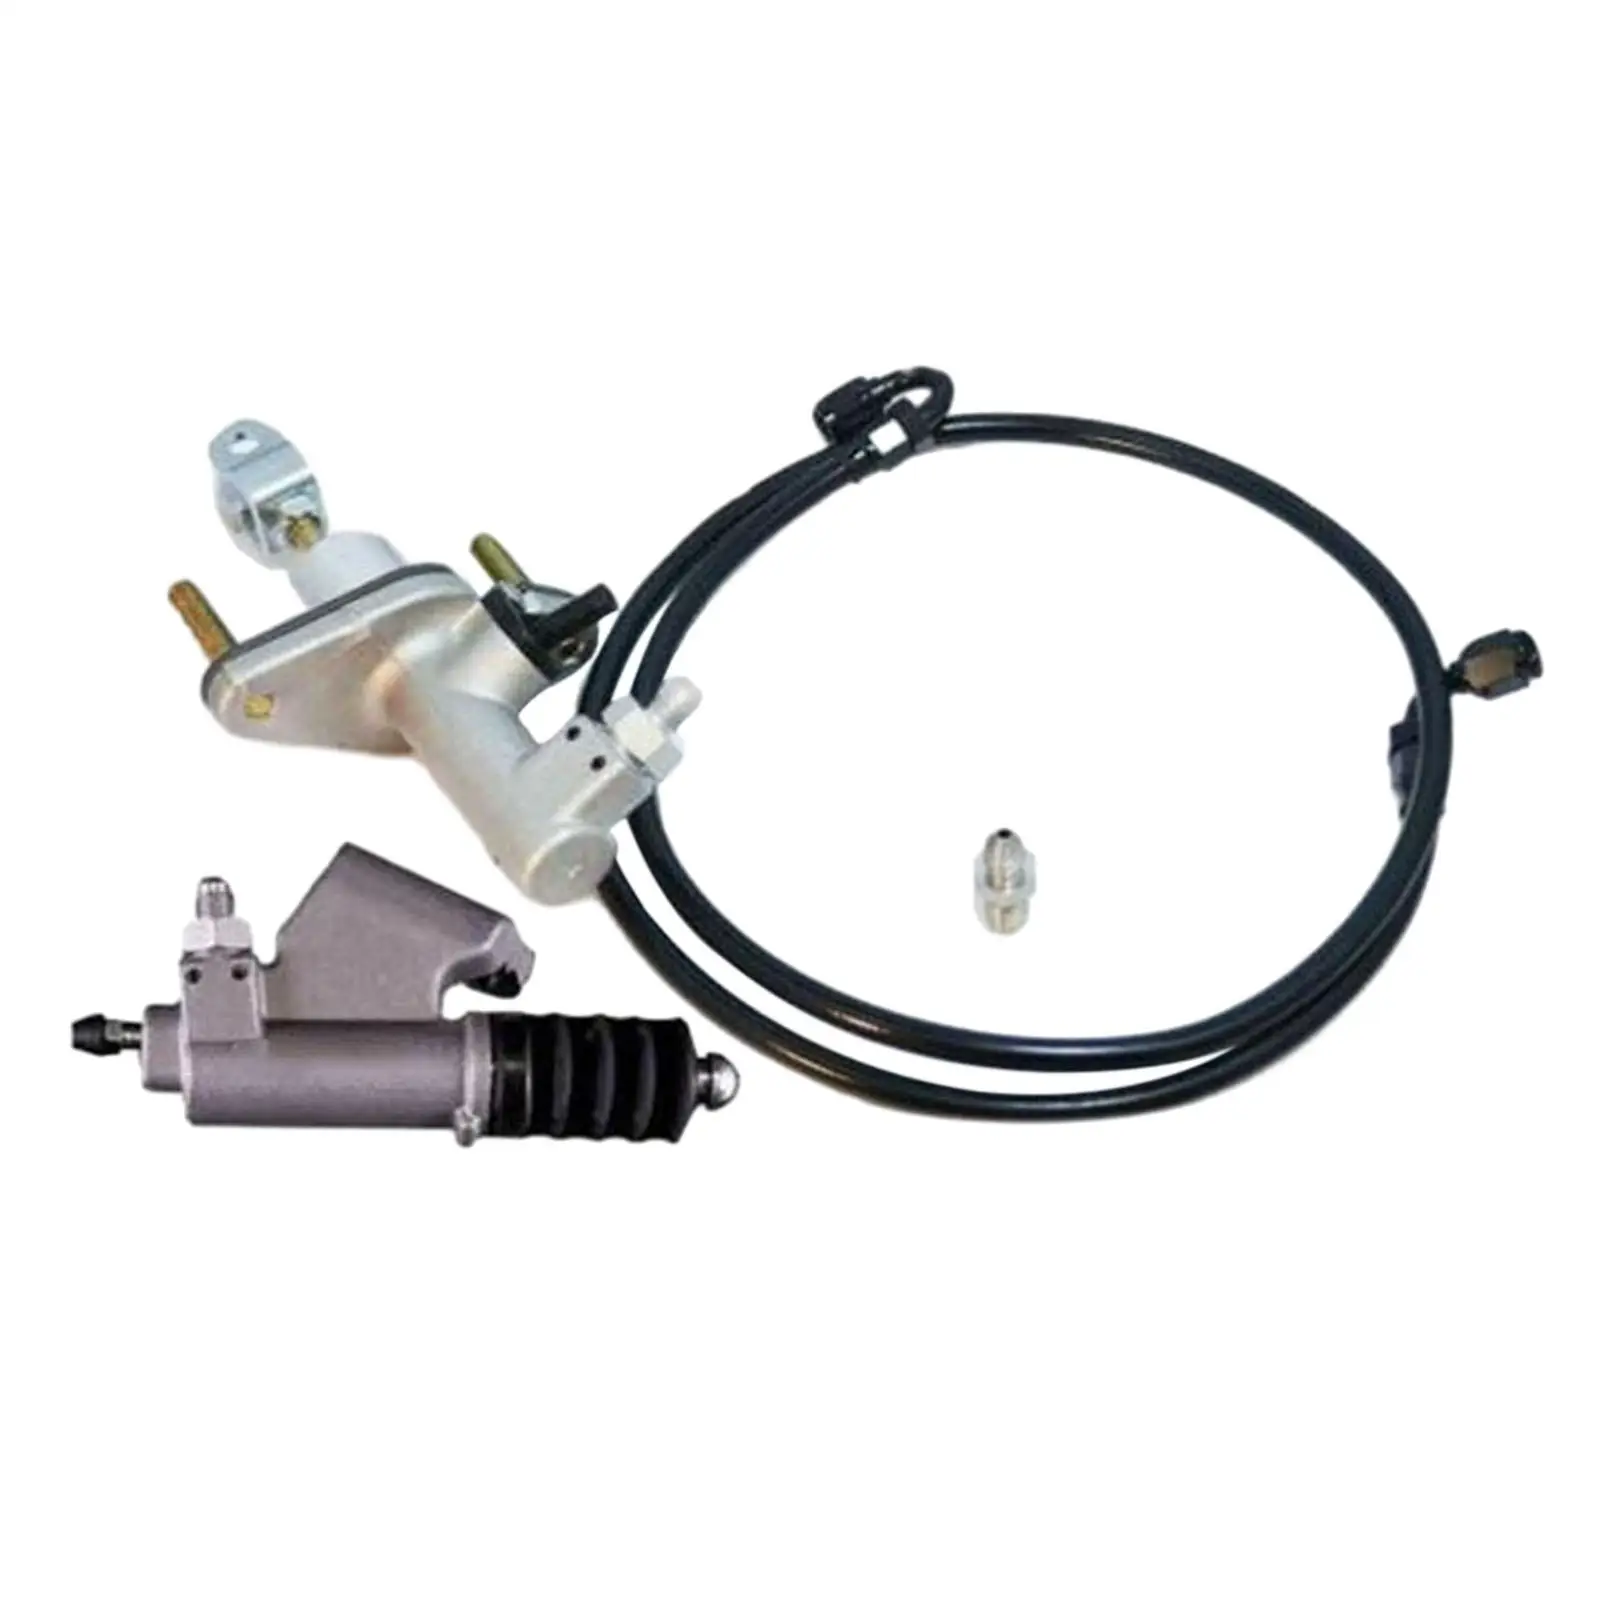 Ktd-clk-kms Clutch Master Cylinder Kit for Acura Easily Install Durable